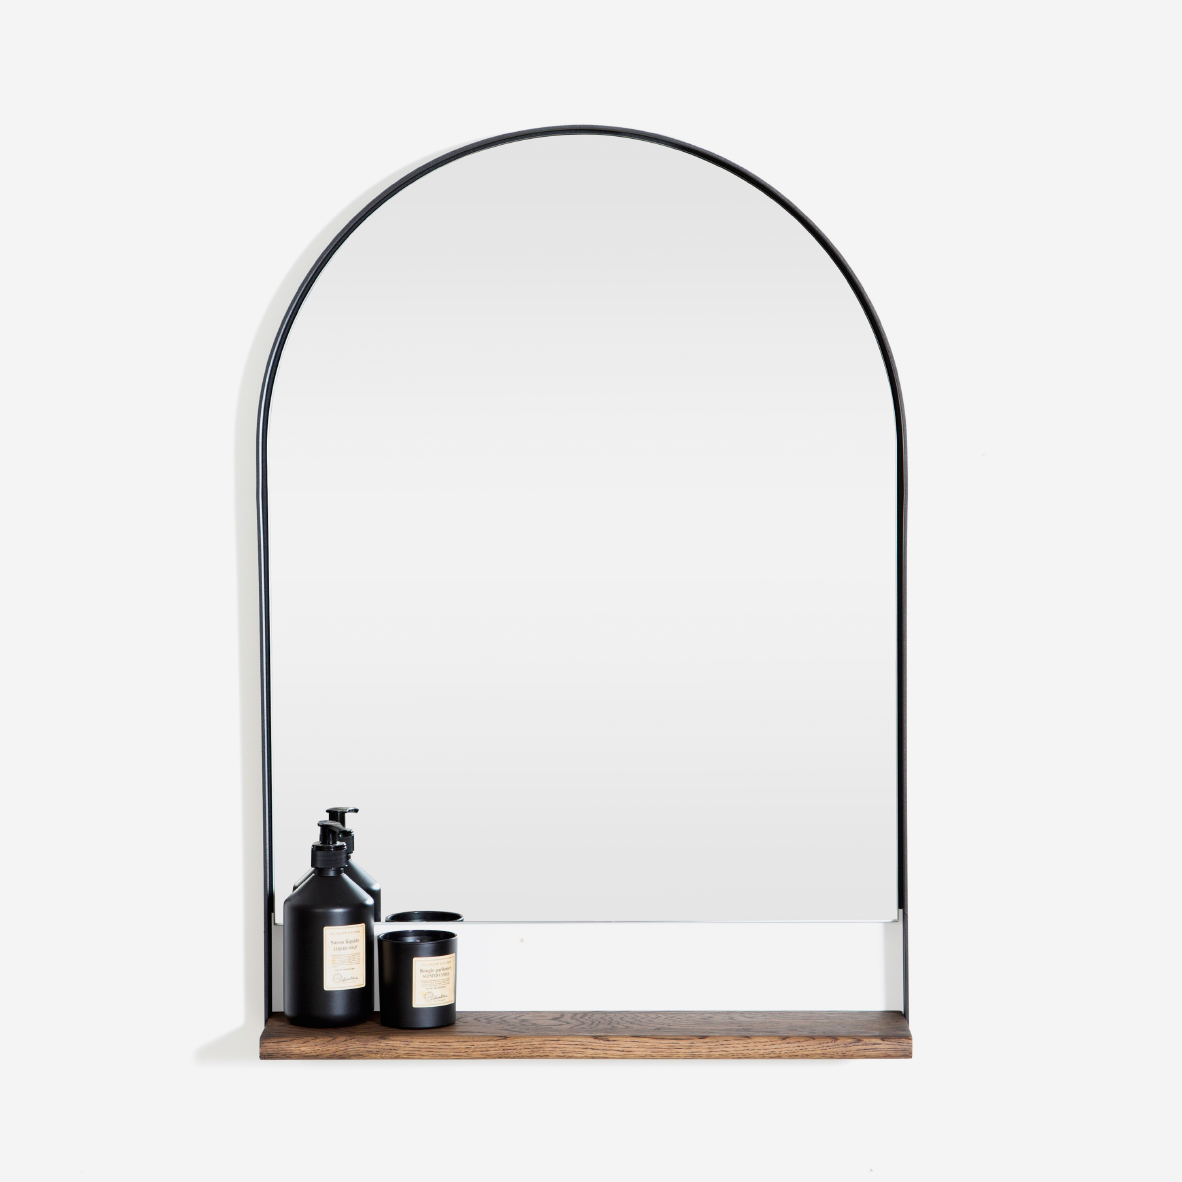 Locally made Arch Mirror with solid oak shelf